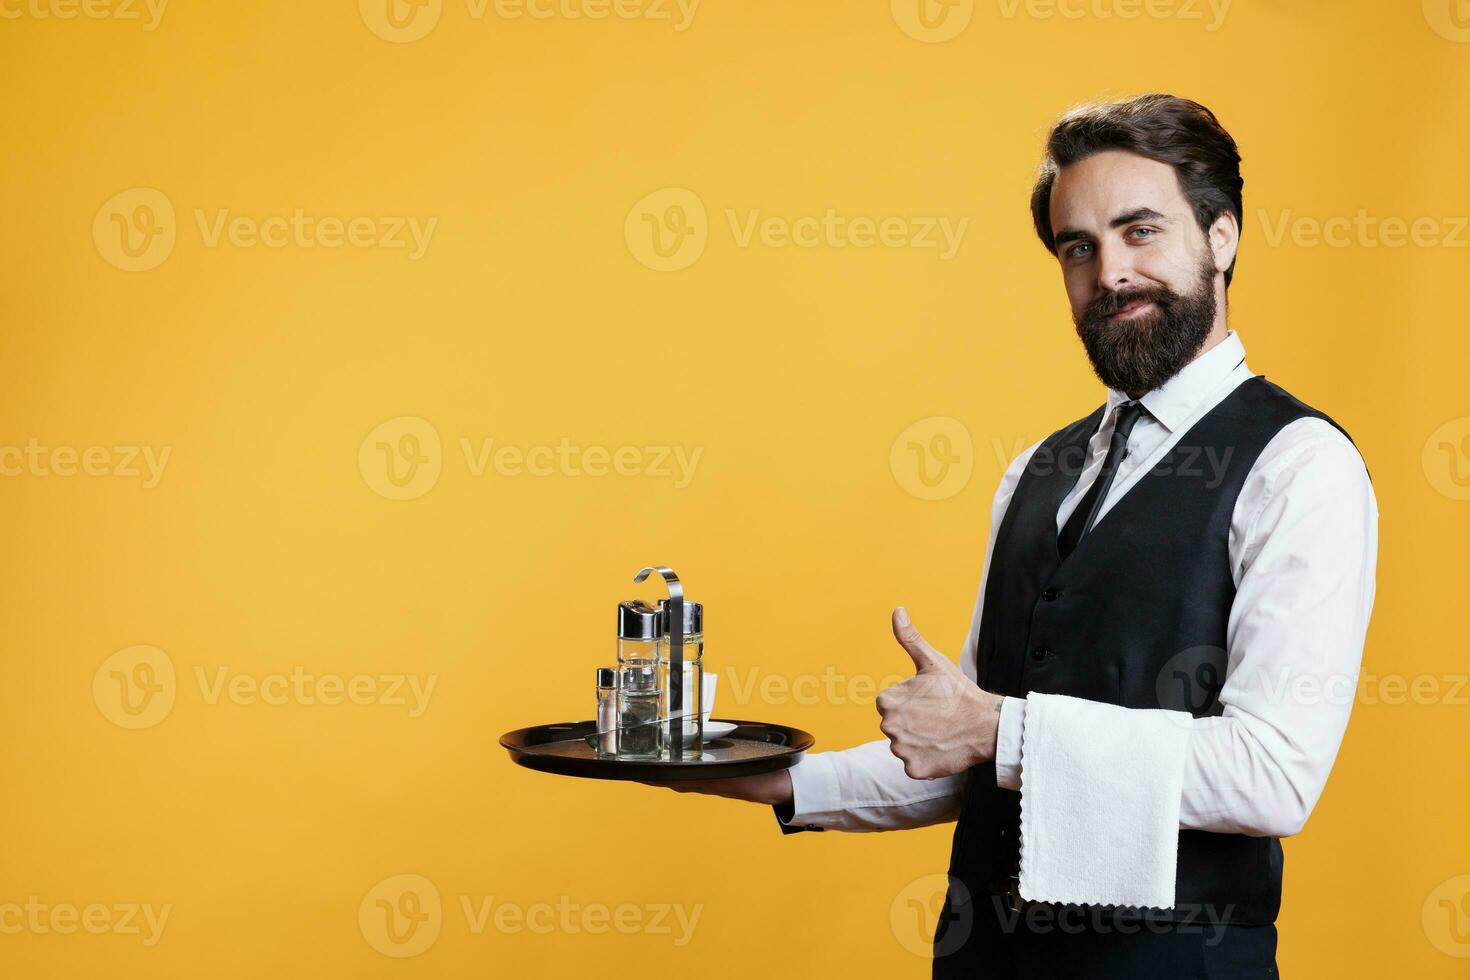 Smiling butler does like sign in studio to express positivity and approval with thumbs up symbol. Elegant happy restaurant worker presents agreement gesture against yellow backdrop. photo